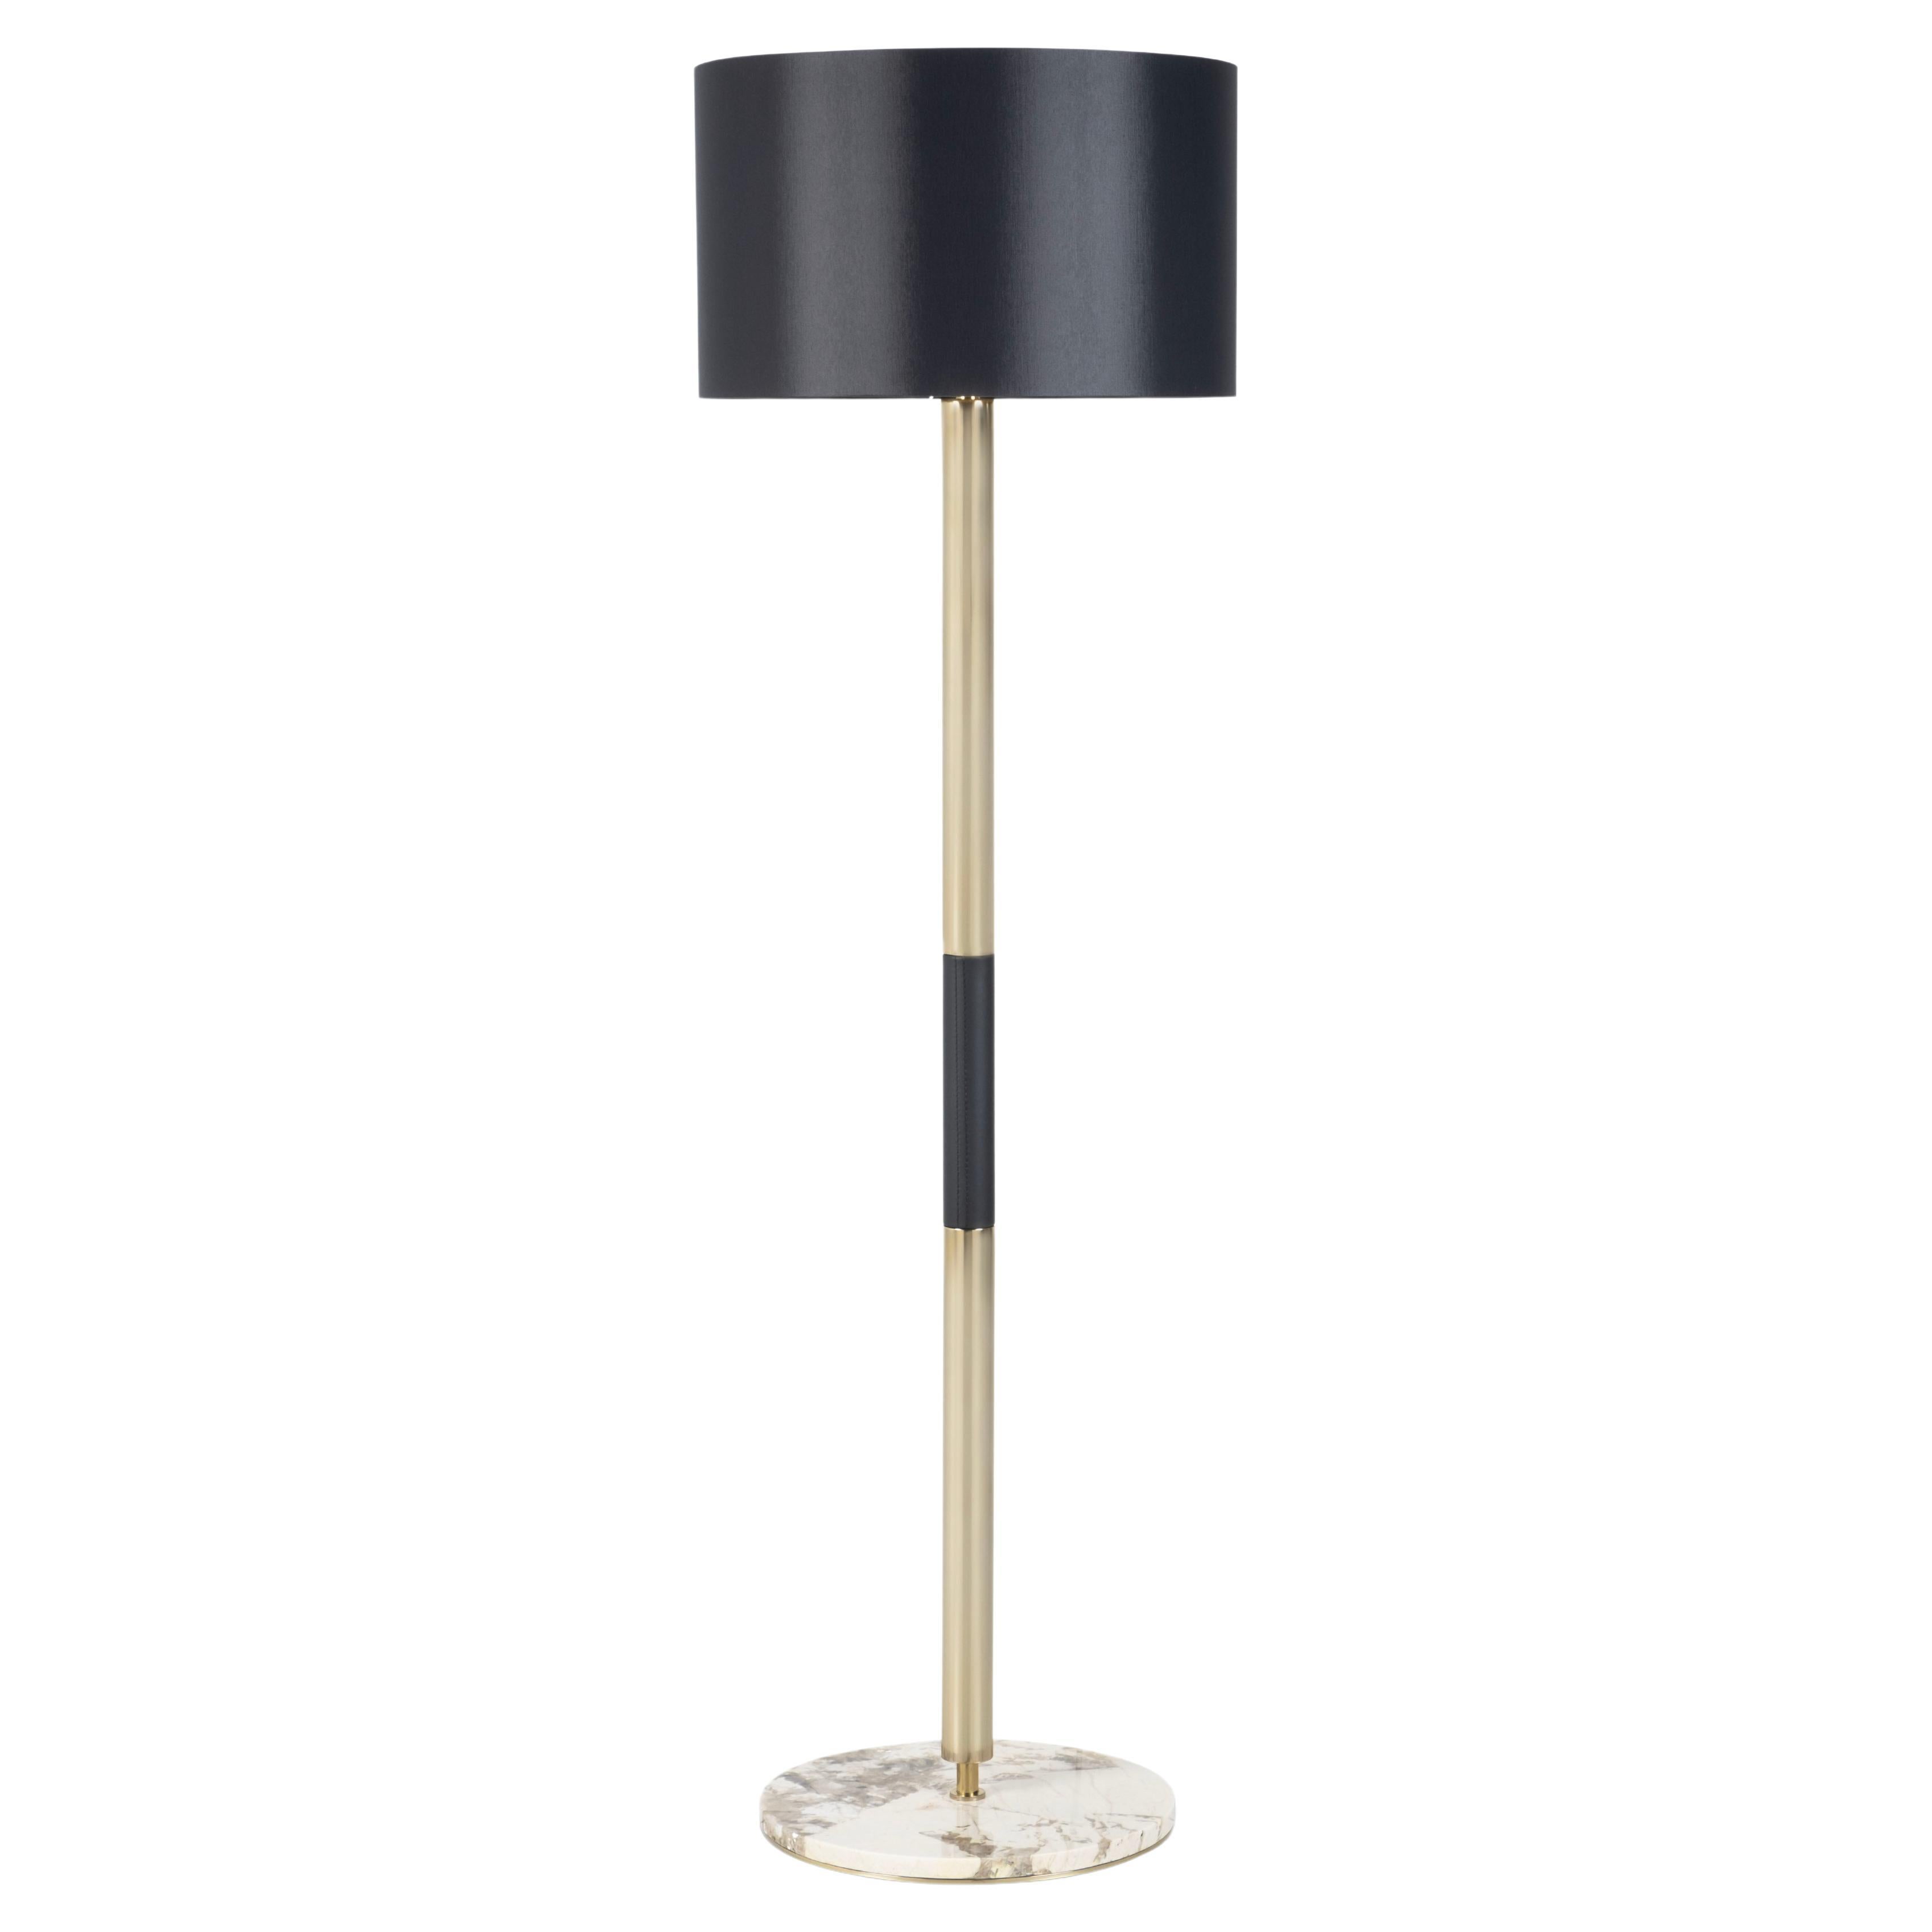 The Moderns Floor Lamp Stainless Black Shade Handmade in Portugal by Greenapple